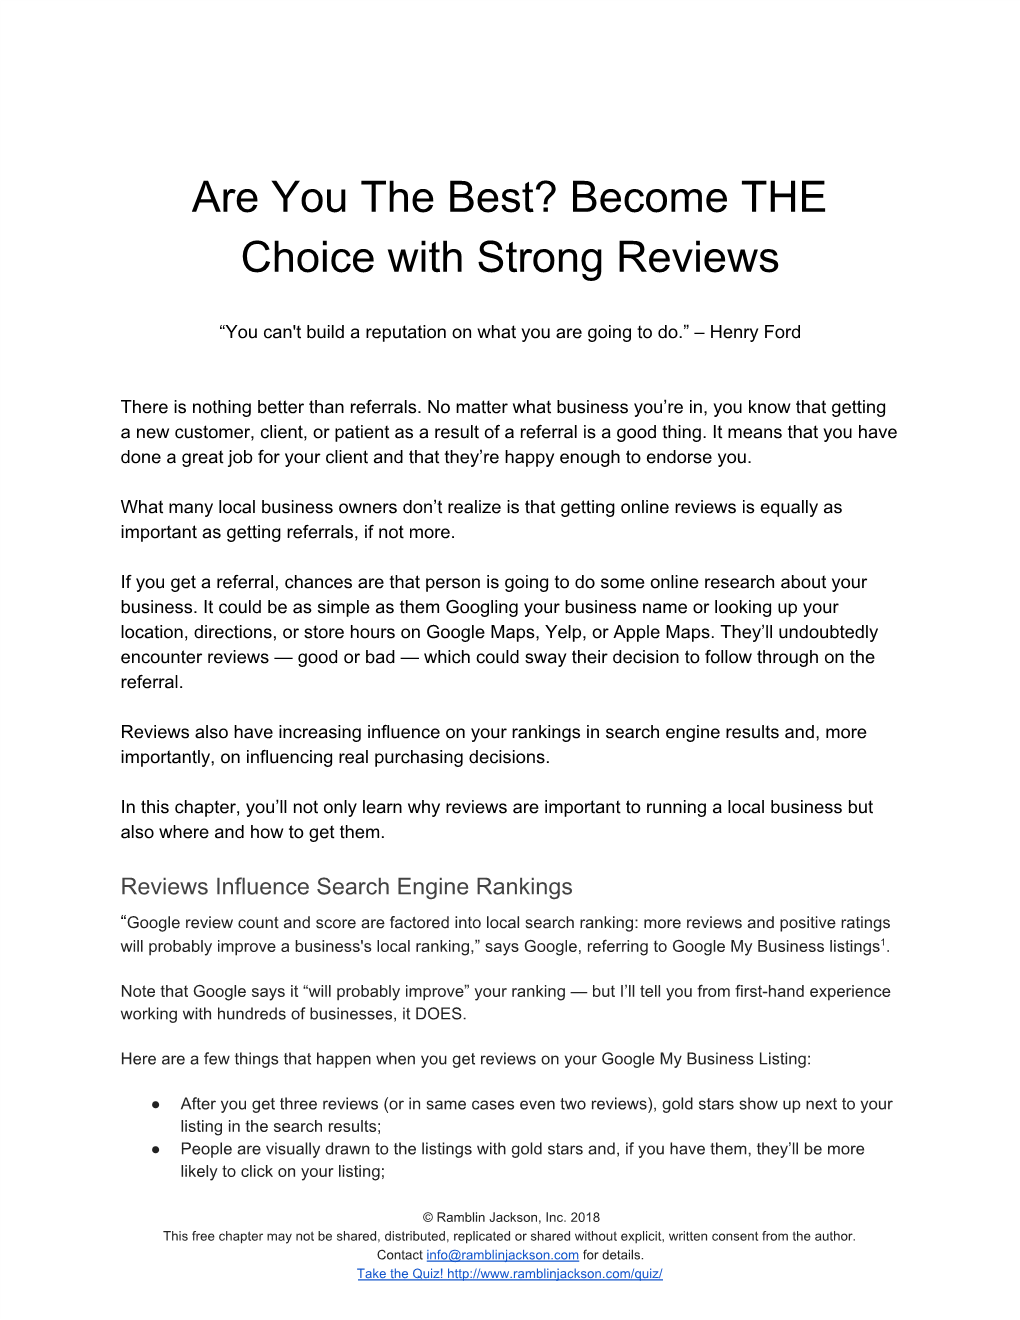 Are You the Best? Become the Choice with Strong Reviews